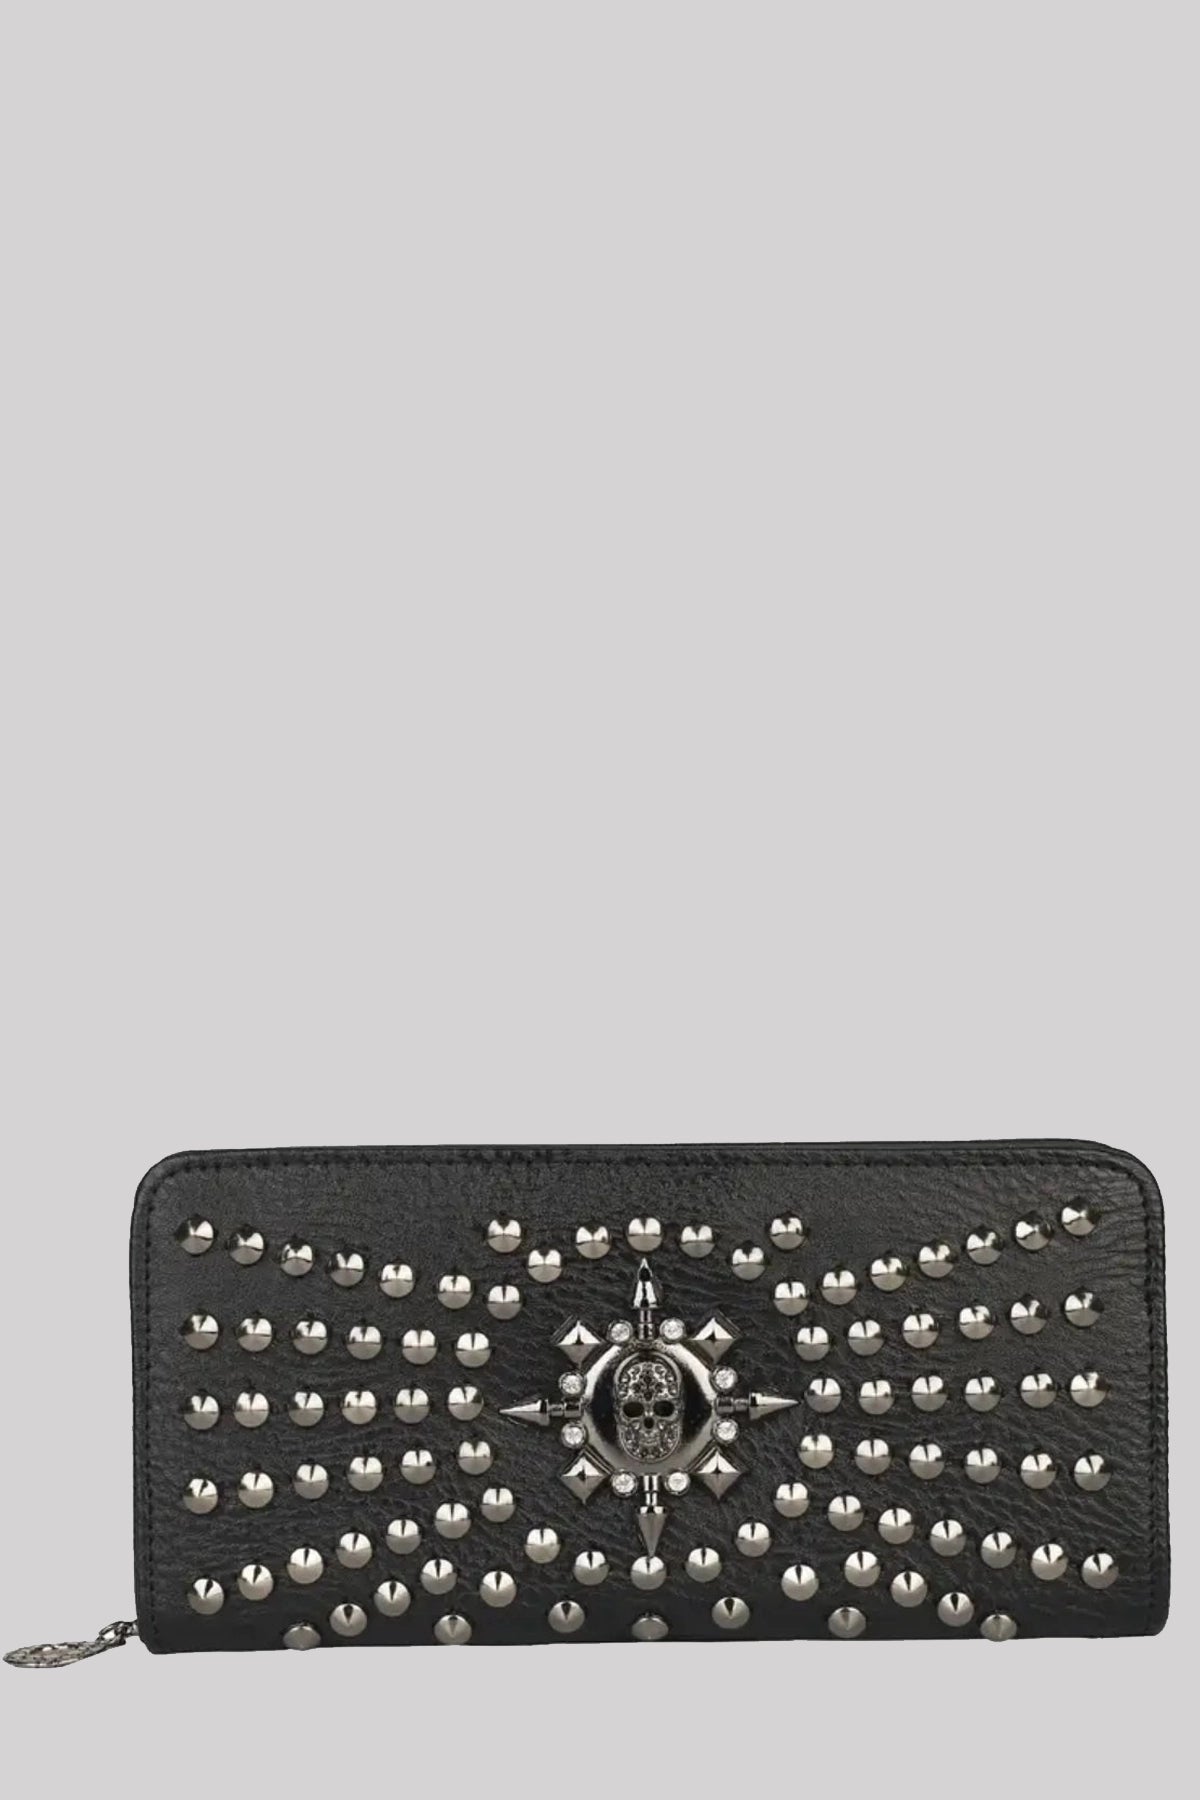 Ro Rox Studded Skull Faux Leather Zip Around Wallet